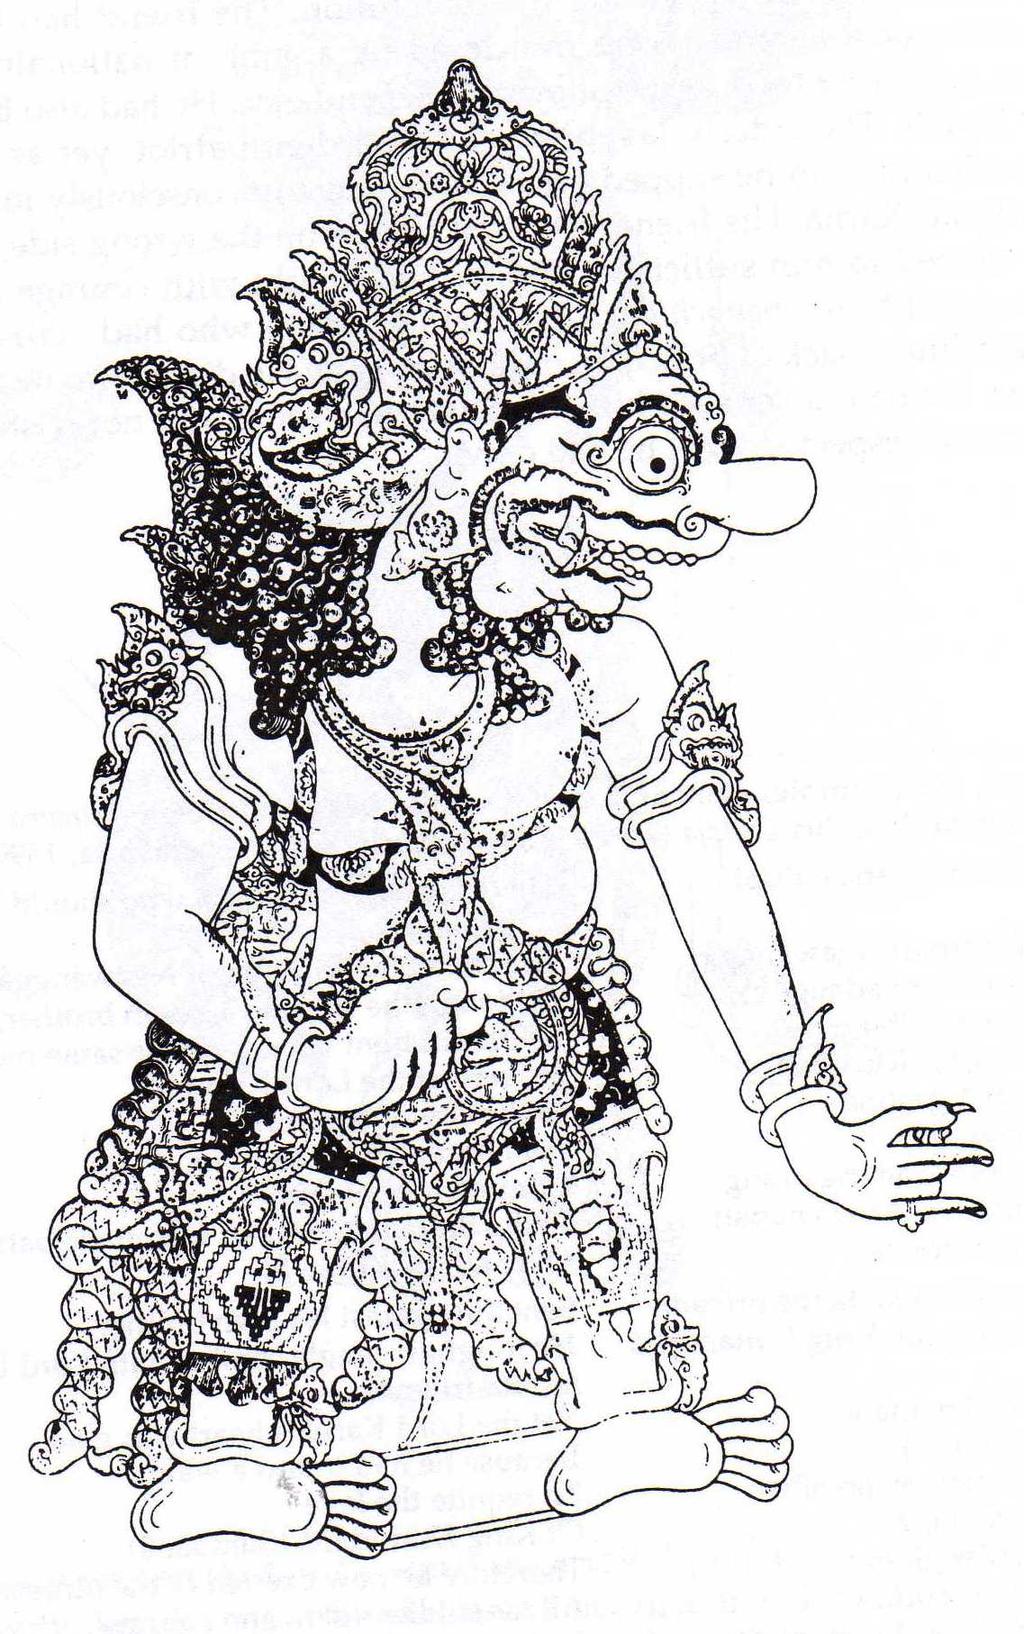 Examples of Wayang Characters Radèn Kumbåkarnå: Similar to Karnå in his outlook and morality, Radèn Kumbåkarnå, hero of the Ramayana, also dies to defend a king whom he realizes has dishonored his